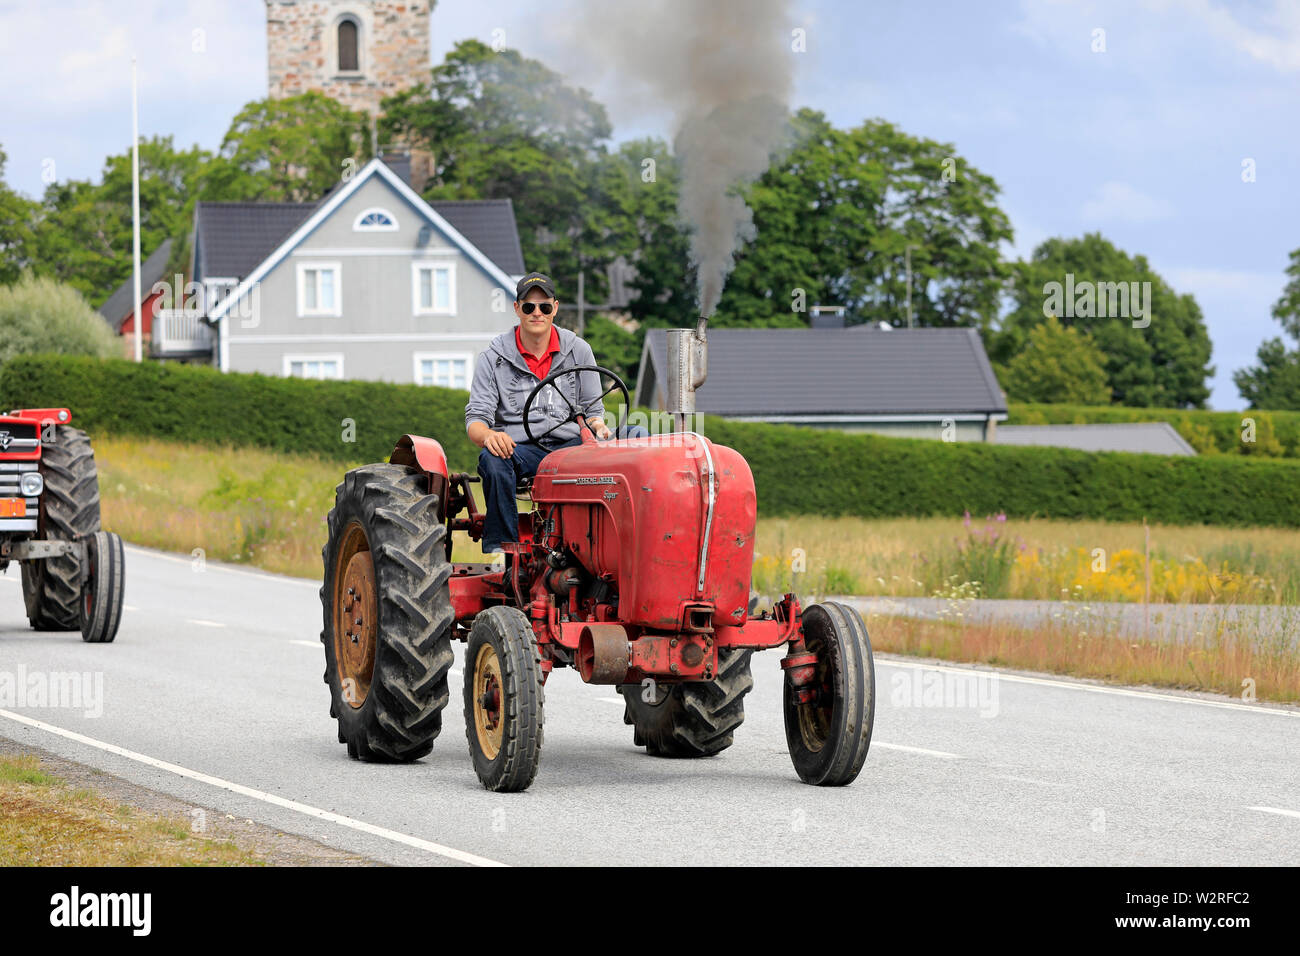 Kimito, Finland. July 6, 2019. Young man drives classic Porsche-Diesel Super Tractor on Kimito Tractorkavalkad, annual vintage tractor show and parade Stock Photo